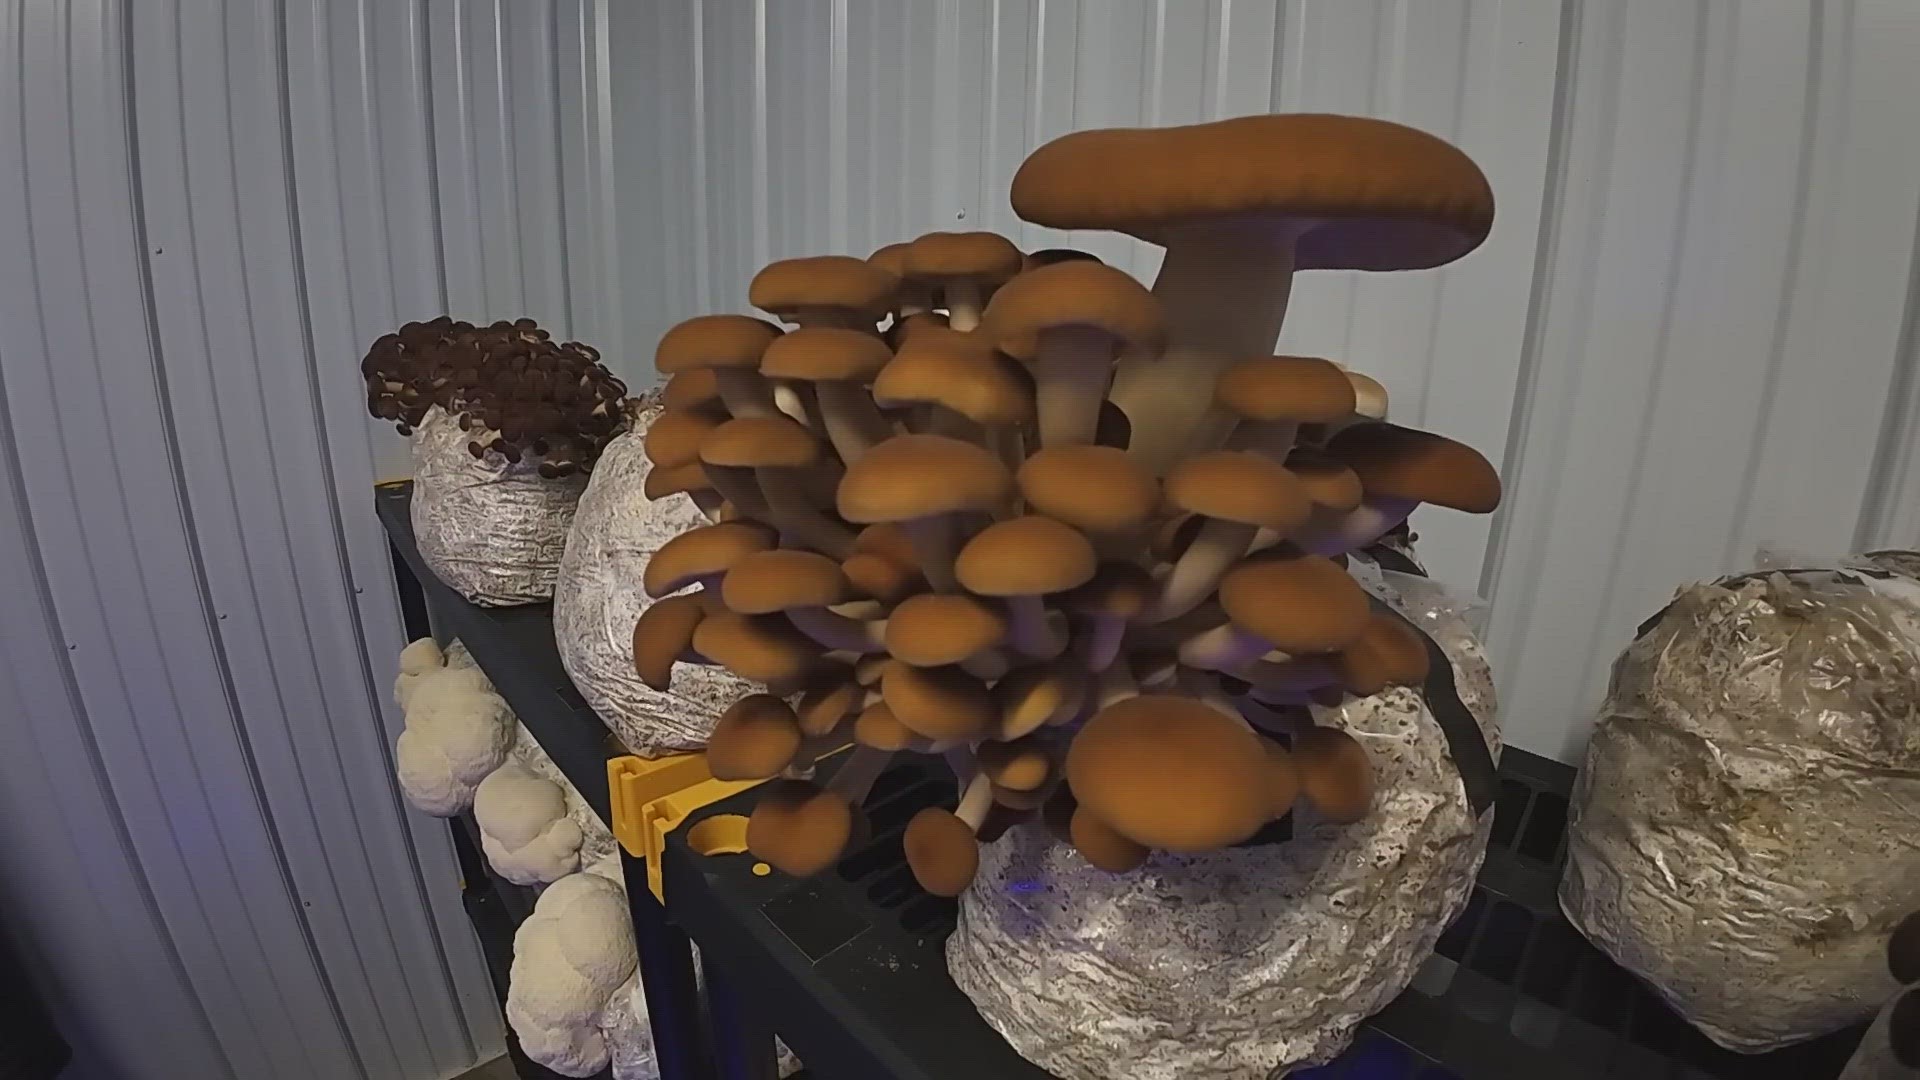 The Spore Store grows and sells mushrooms for the table and for health, with products being sold both online and at the Medina Farmers Market.